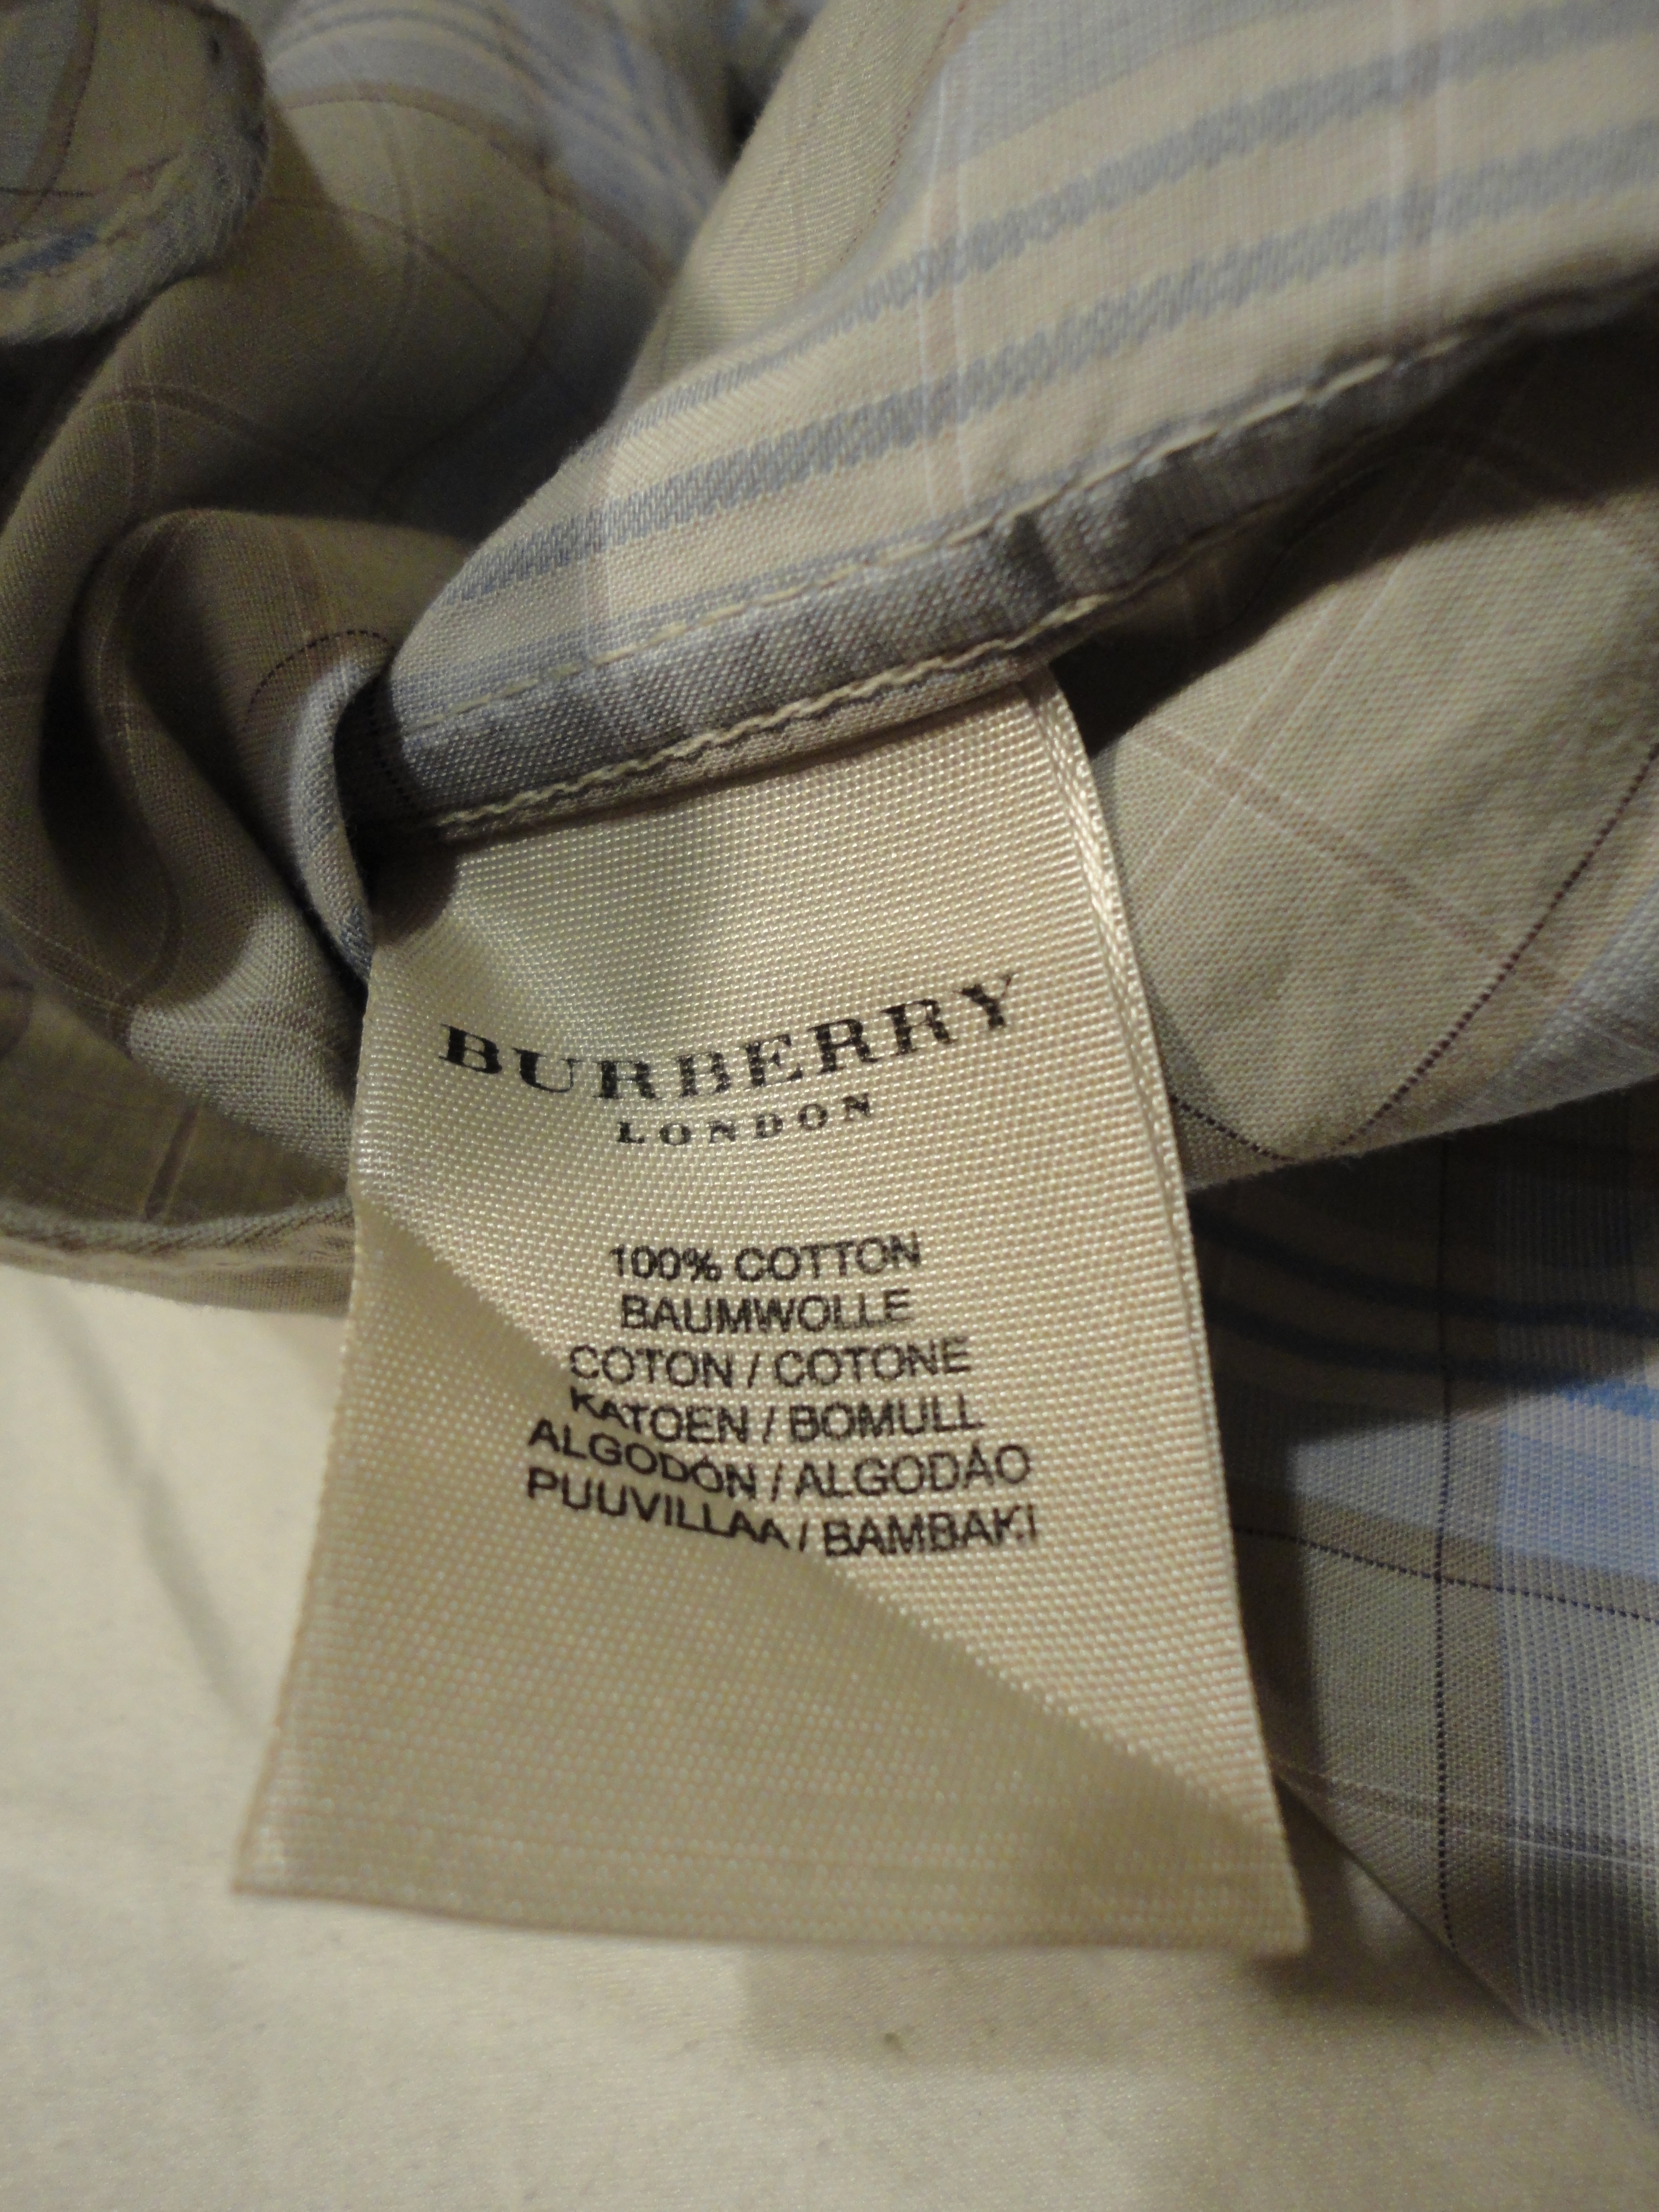 Help authenticating a Burberry shirt 